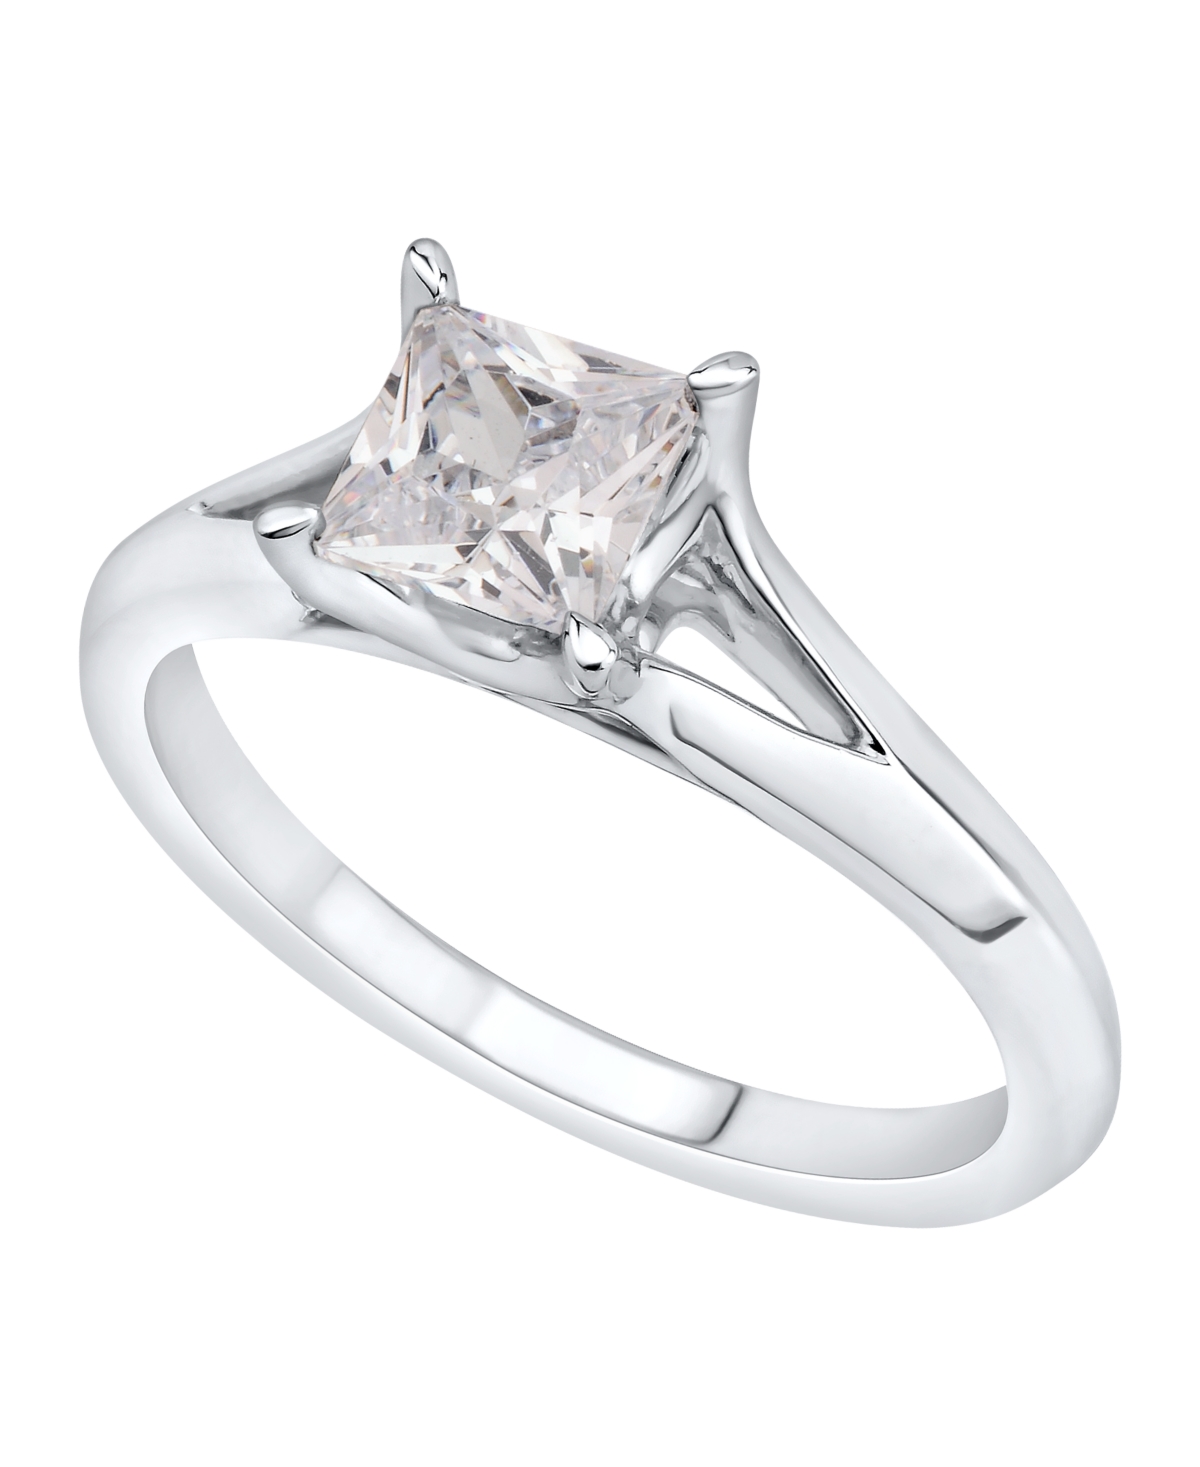 Gia Certified Diamonds Gia Certified Diamond Princess Solitaire Engagement Ring (1 1/2 ct. t.w.) in 14K White Gold